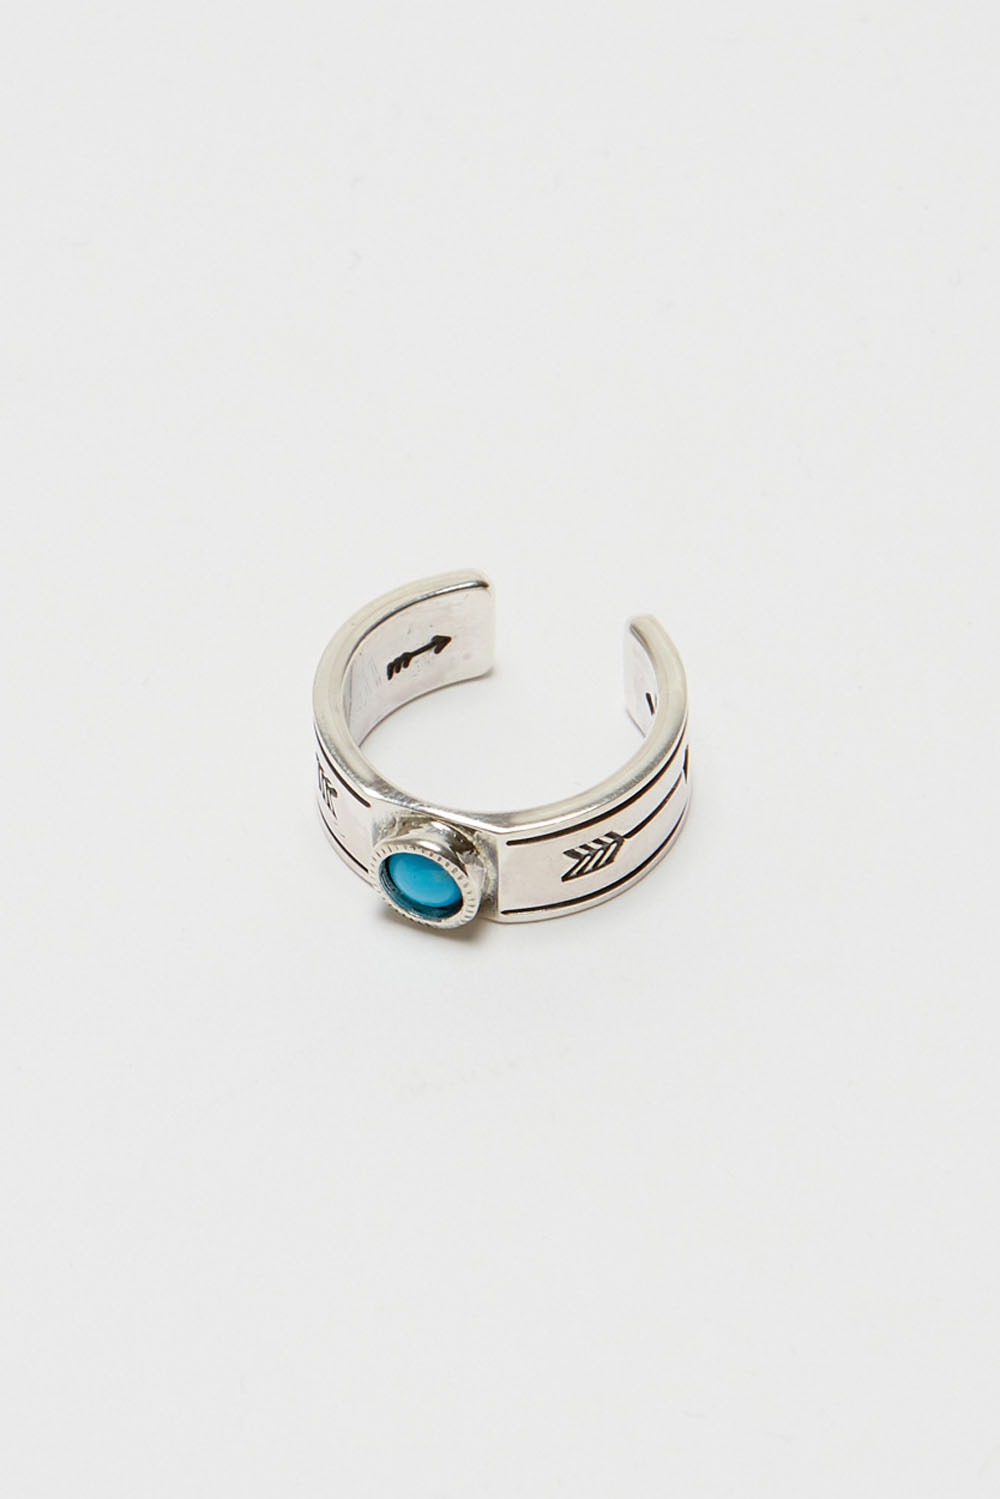 900 Silver Turquoise Stamp Ring (W-320b)_Silver